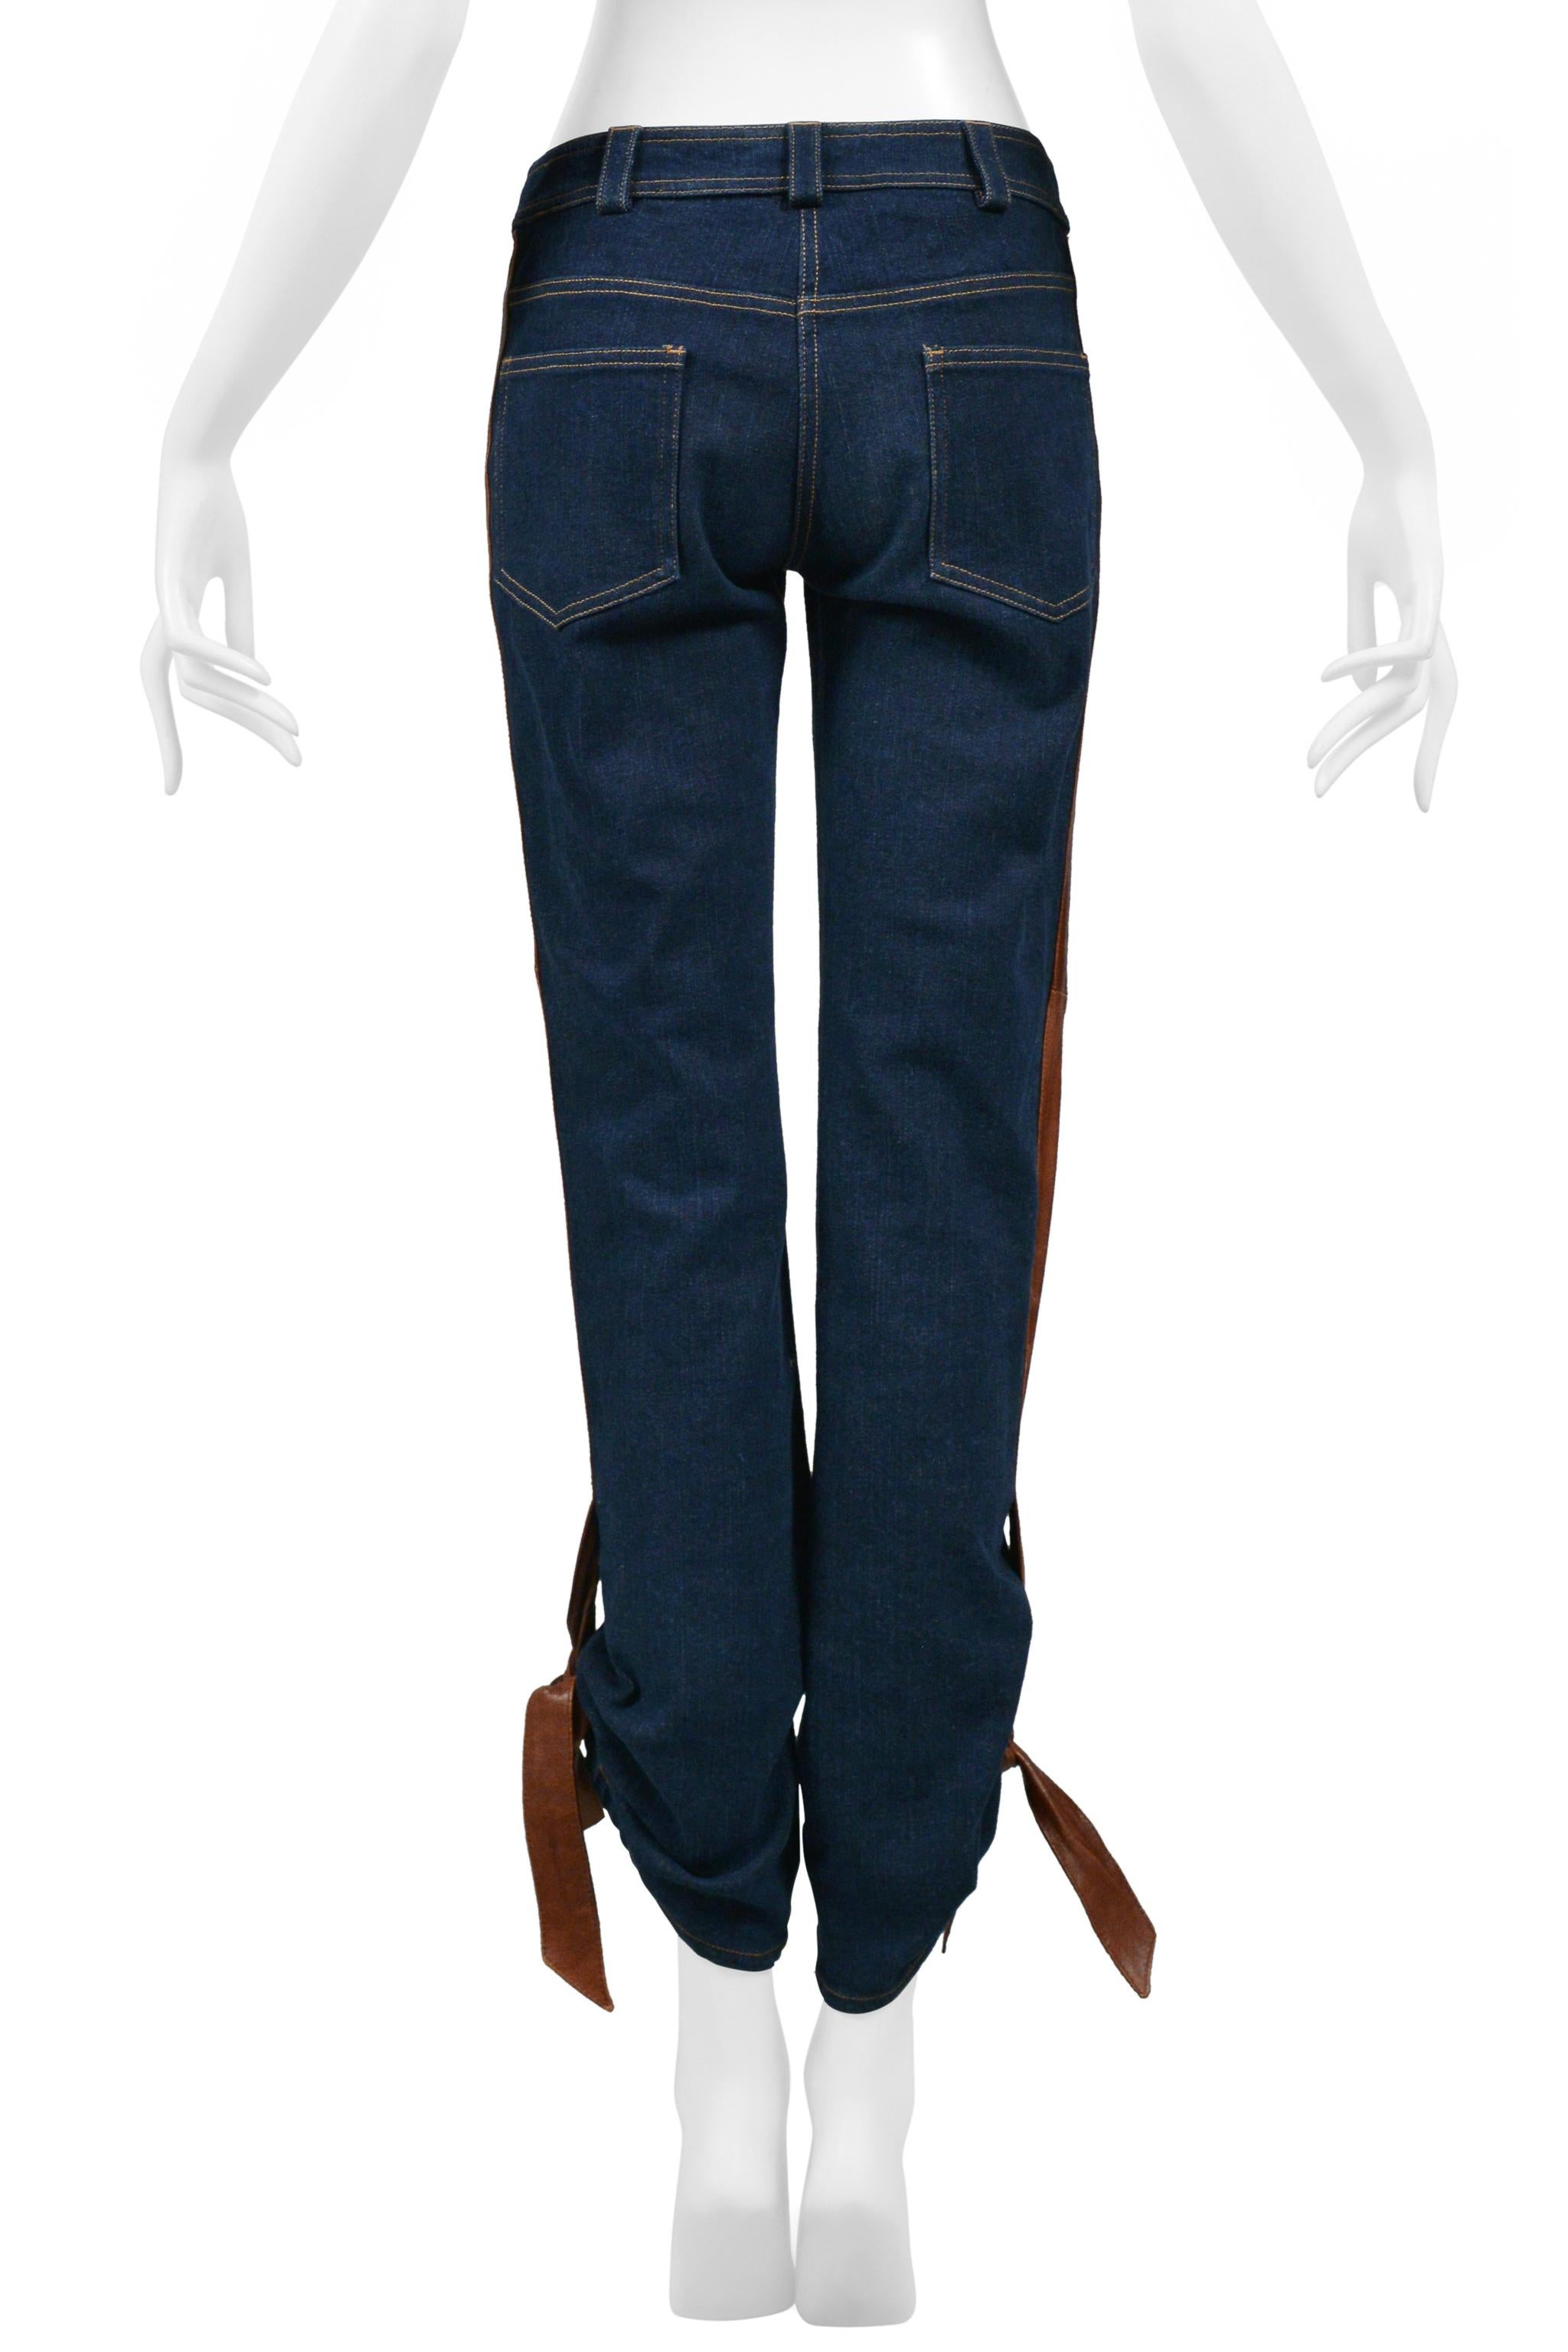 Christian Dior Blue Denim Jeans With Leather Trim & Ties 2005 For Sale 5